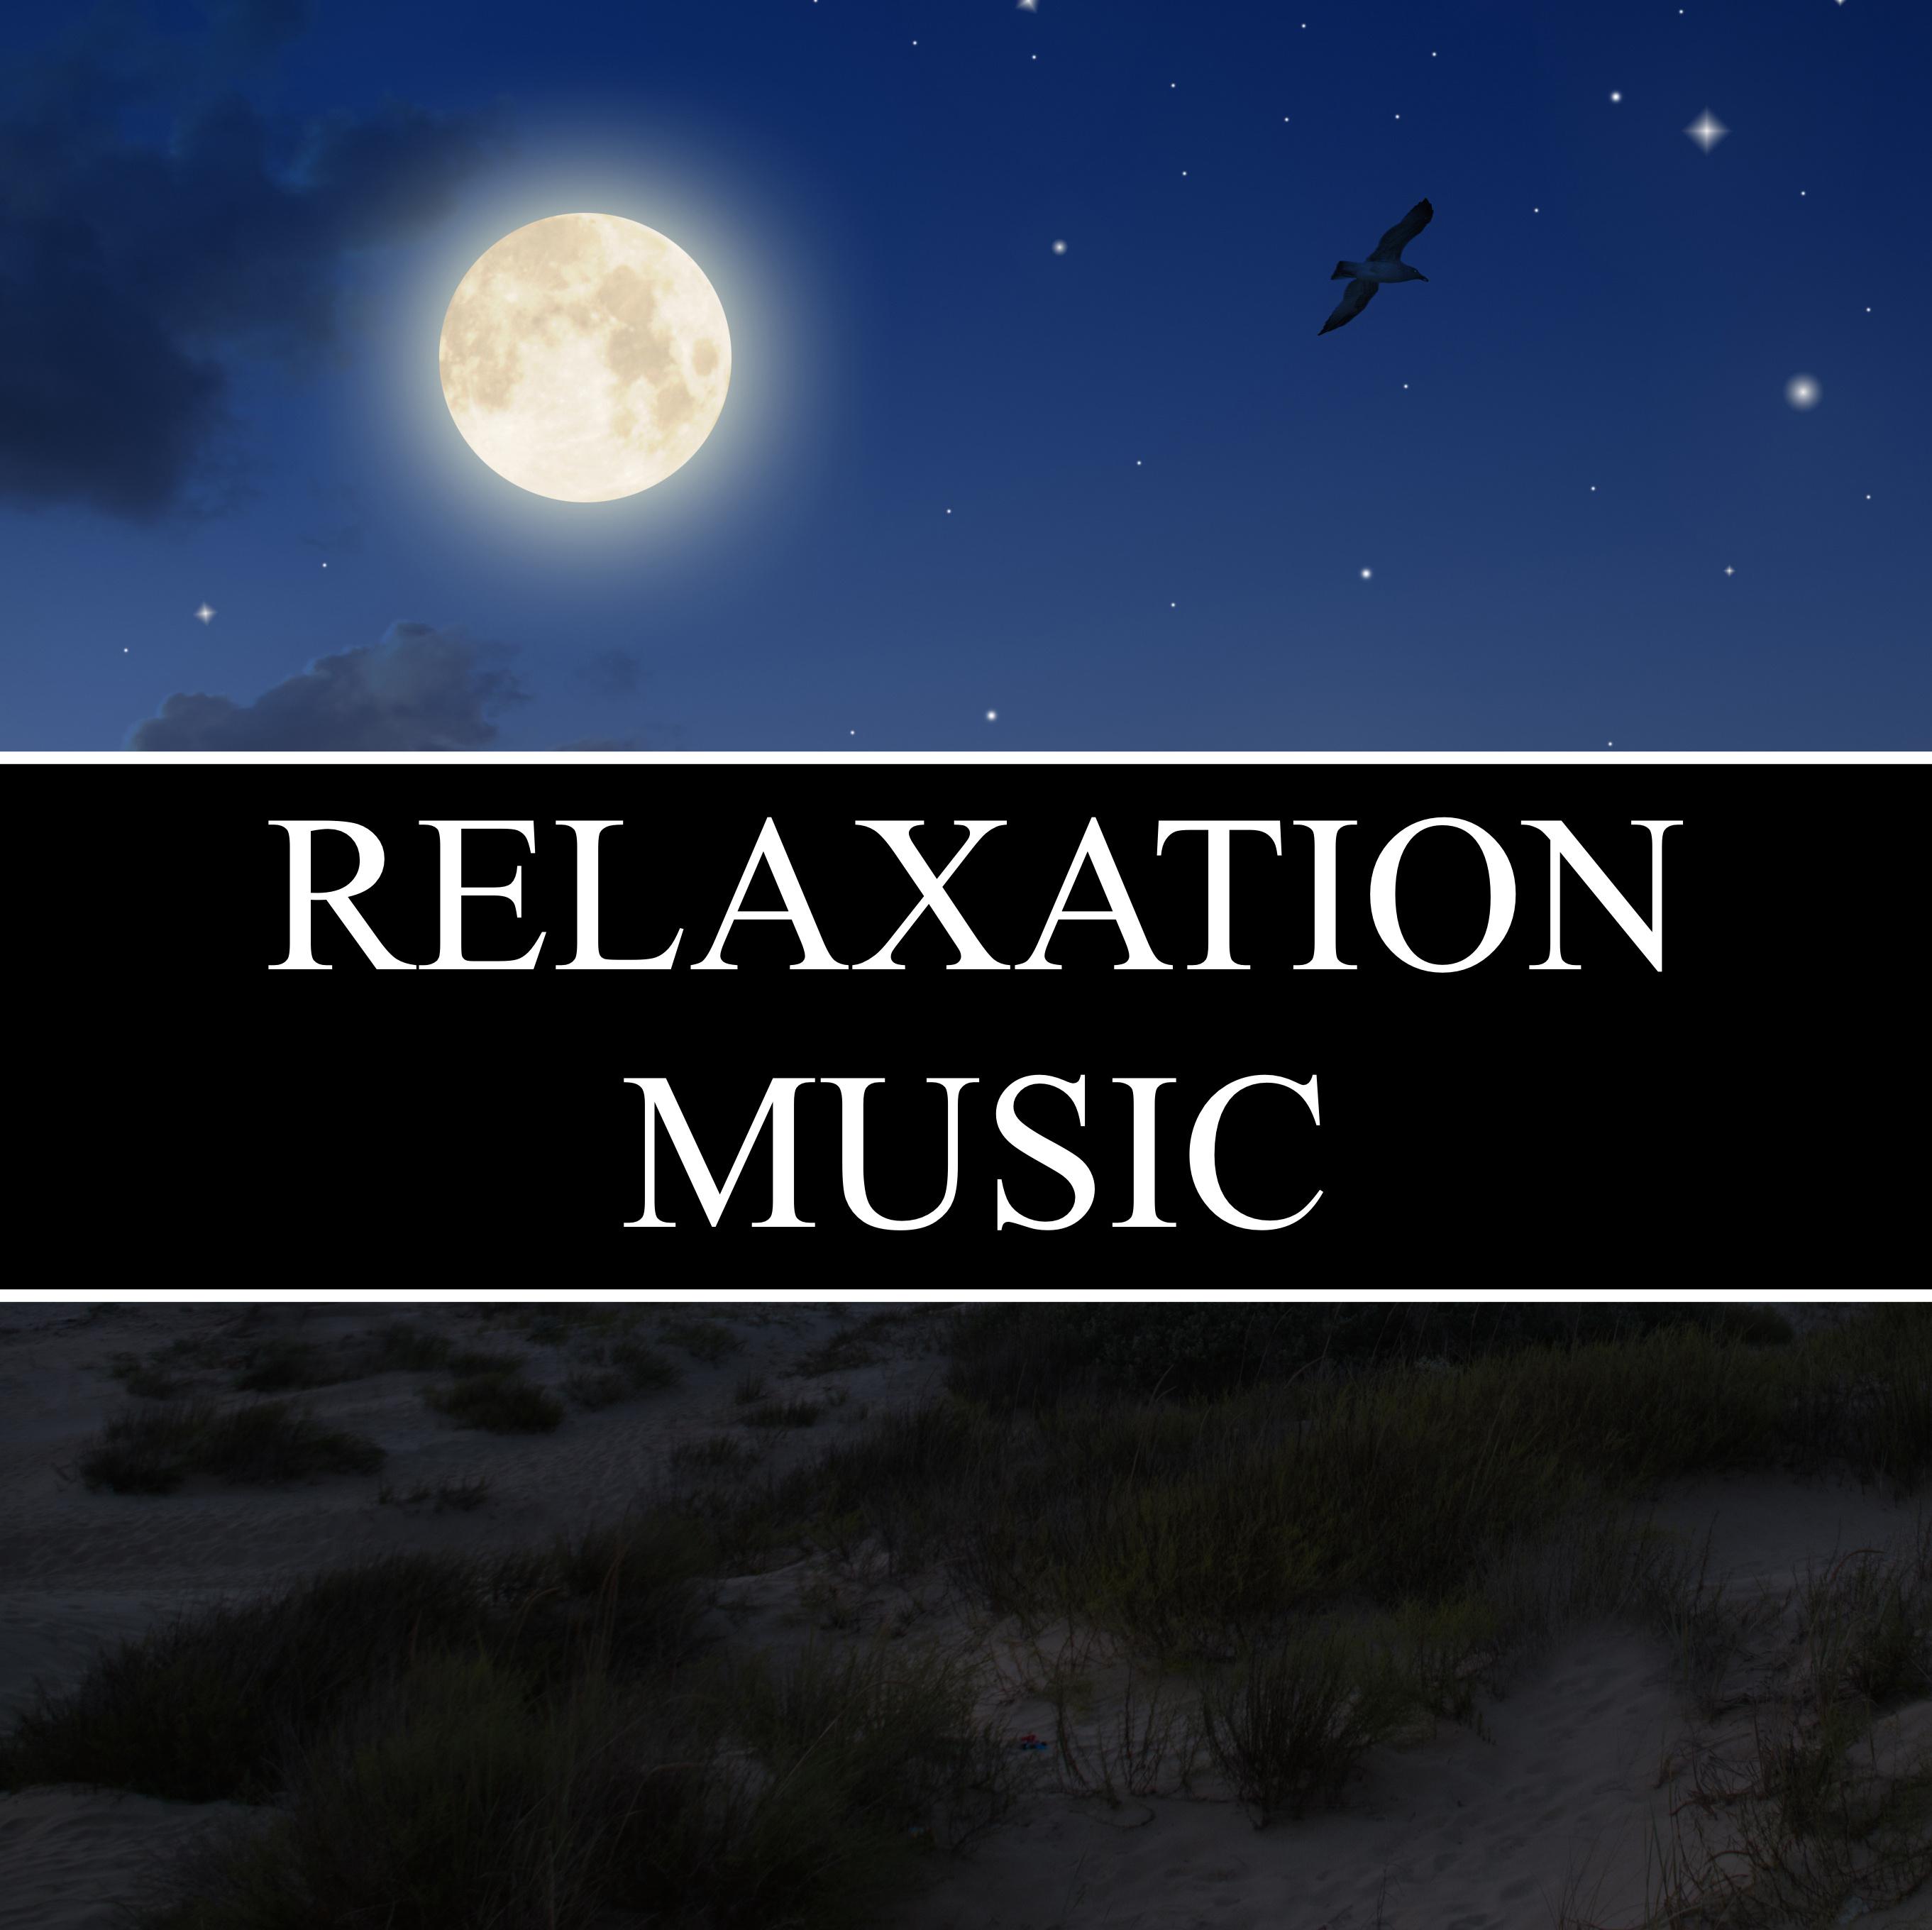 Relaxation Music - Sounds for Deep Study Focus and for Times of Calmness